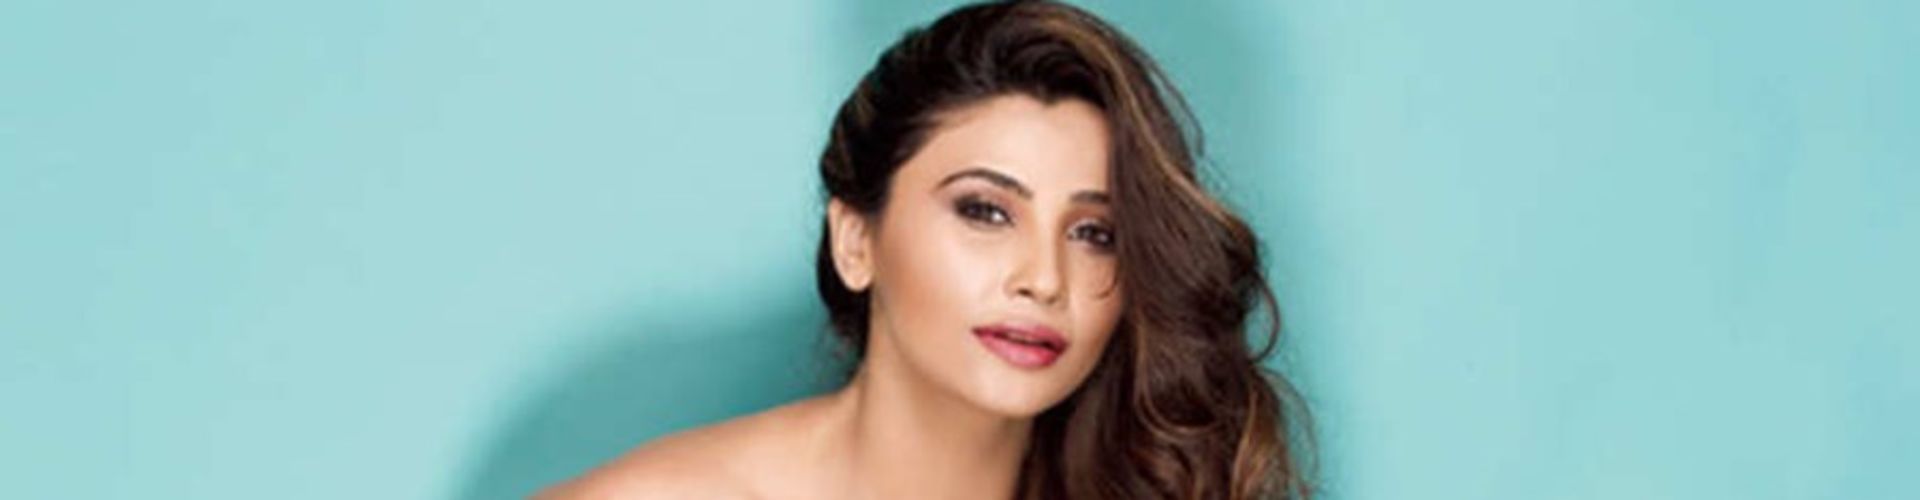 Scary To Carry An Entire Project On Ones Shoulder Says Daisy Shah